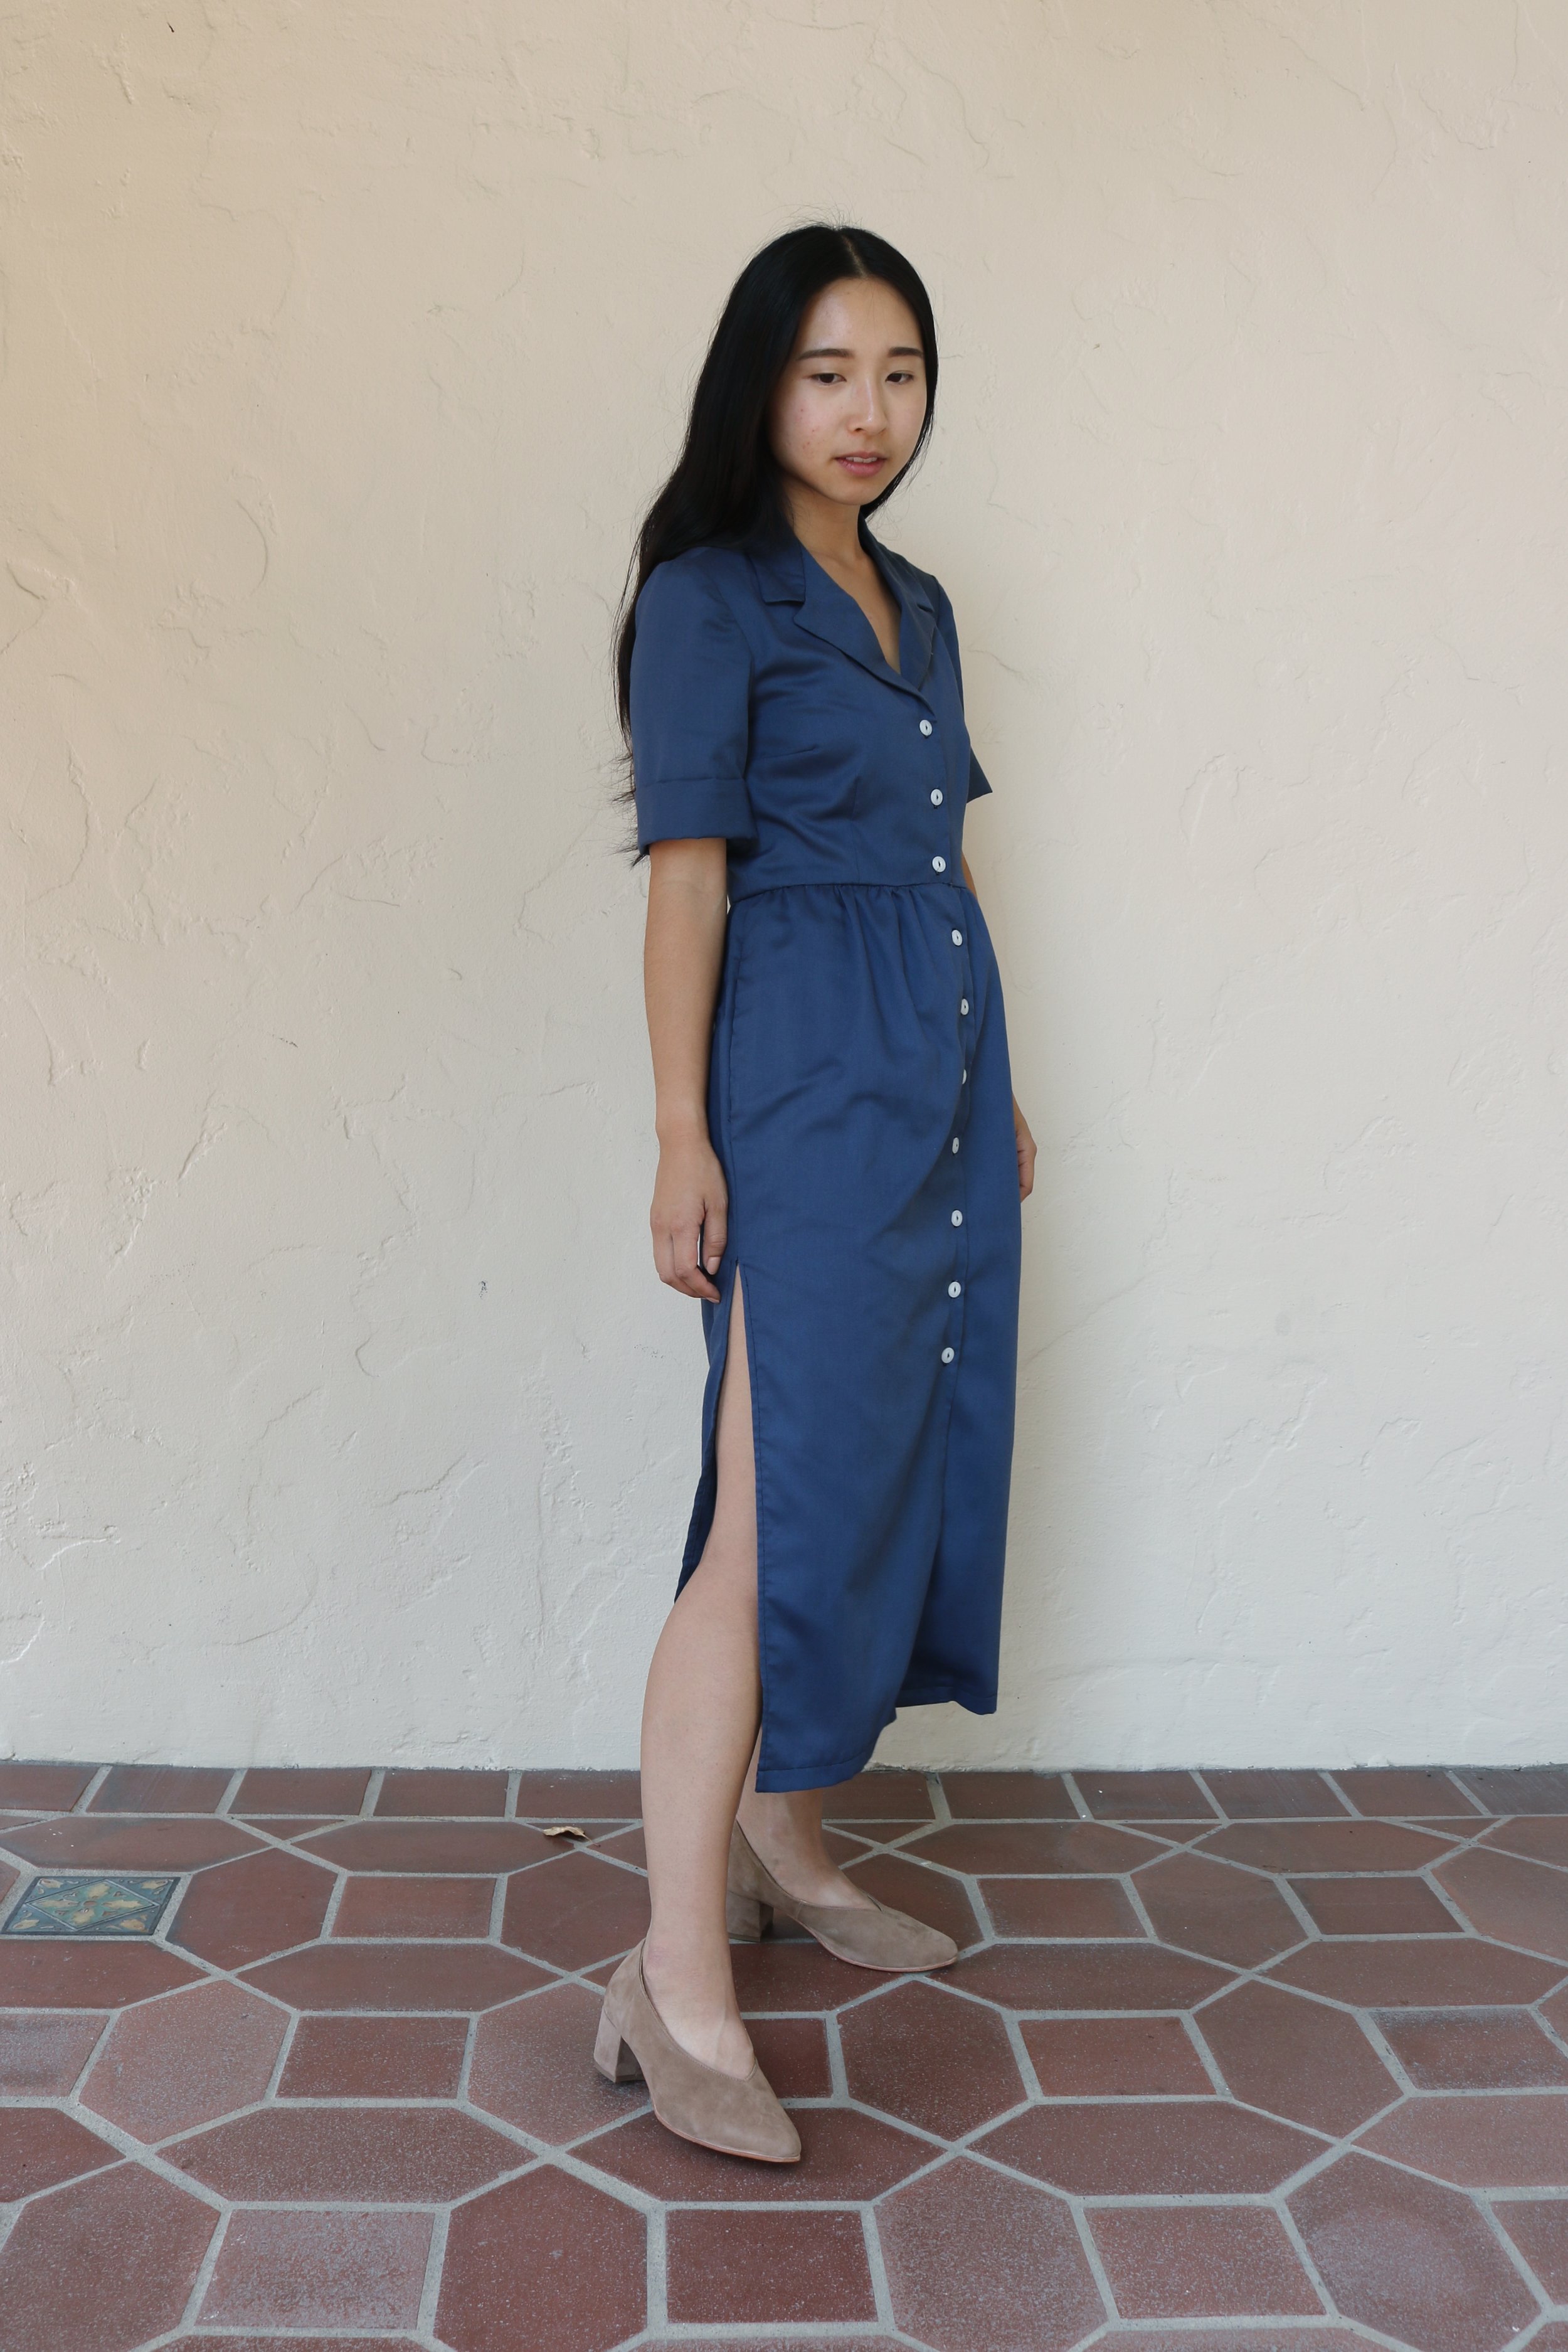 Sarina in L.A.&nbsp;wearing a dress of her own design with the Belu Pump